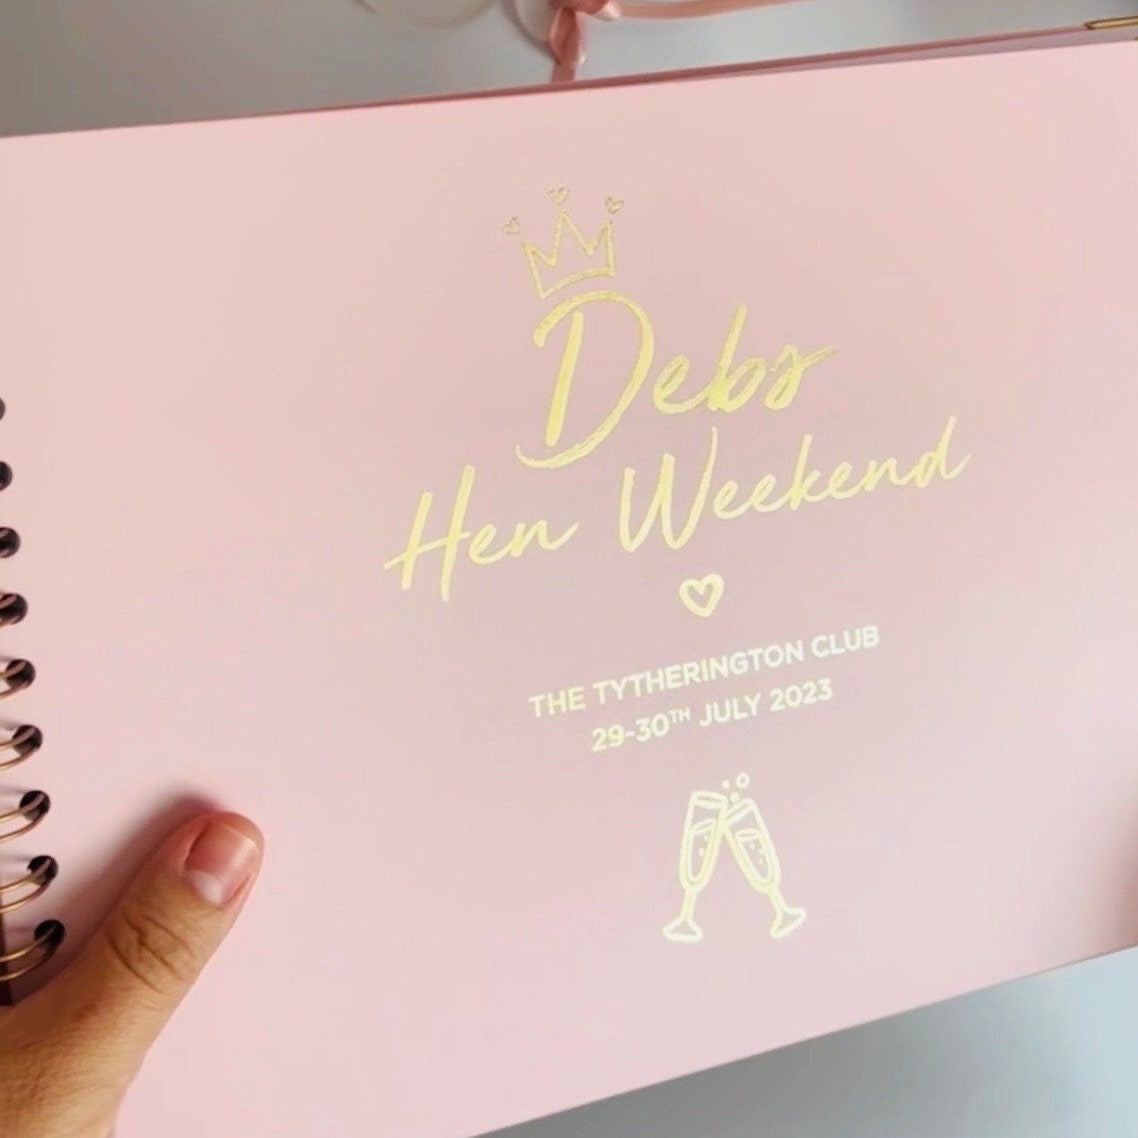 A powder Pink memory book with the words 'Debs Hen Weekend, The tytherington Club' with an image of champagne glasses all in gold foiling